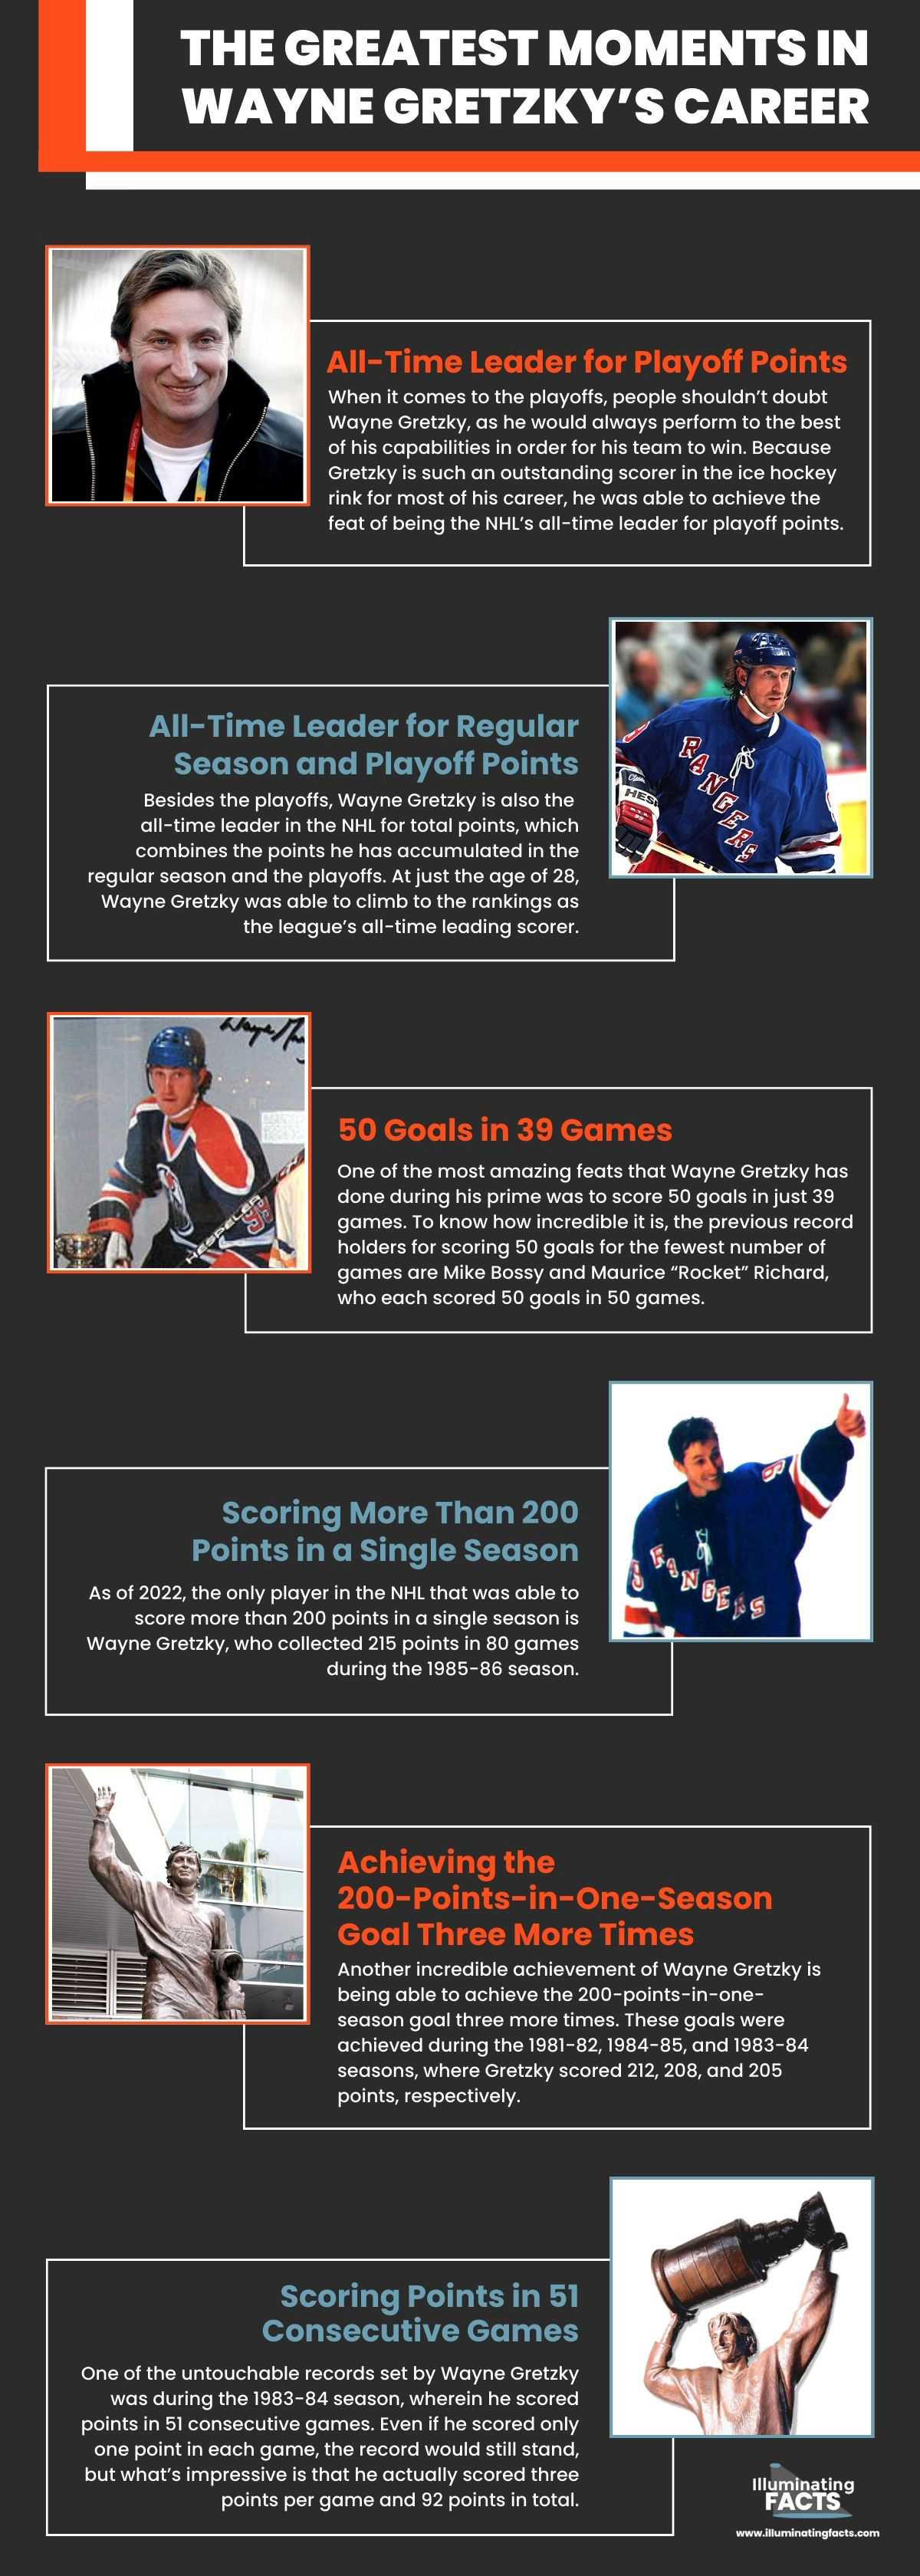 The Greatest Moments in Wayne Gretzky’s Career